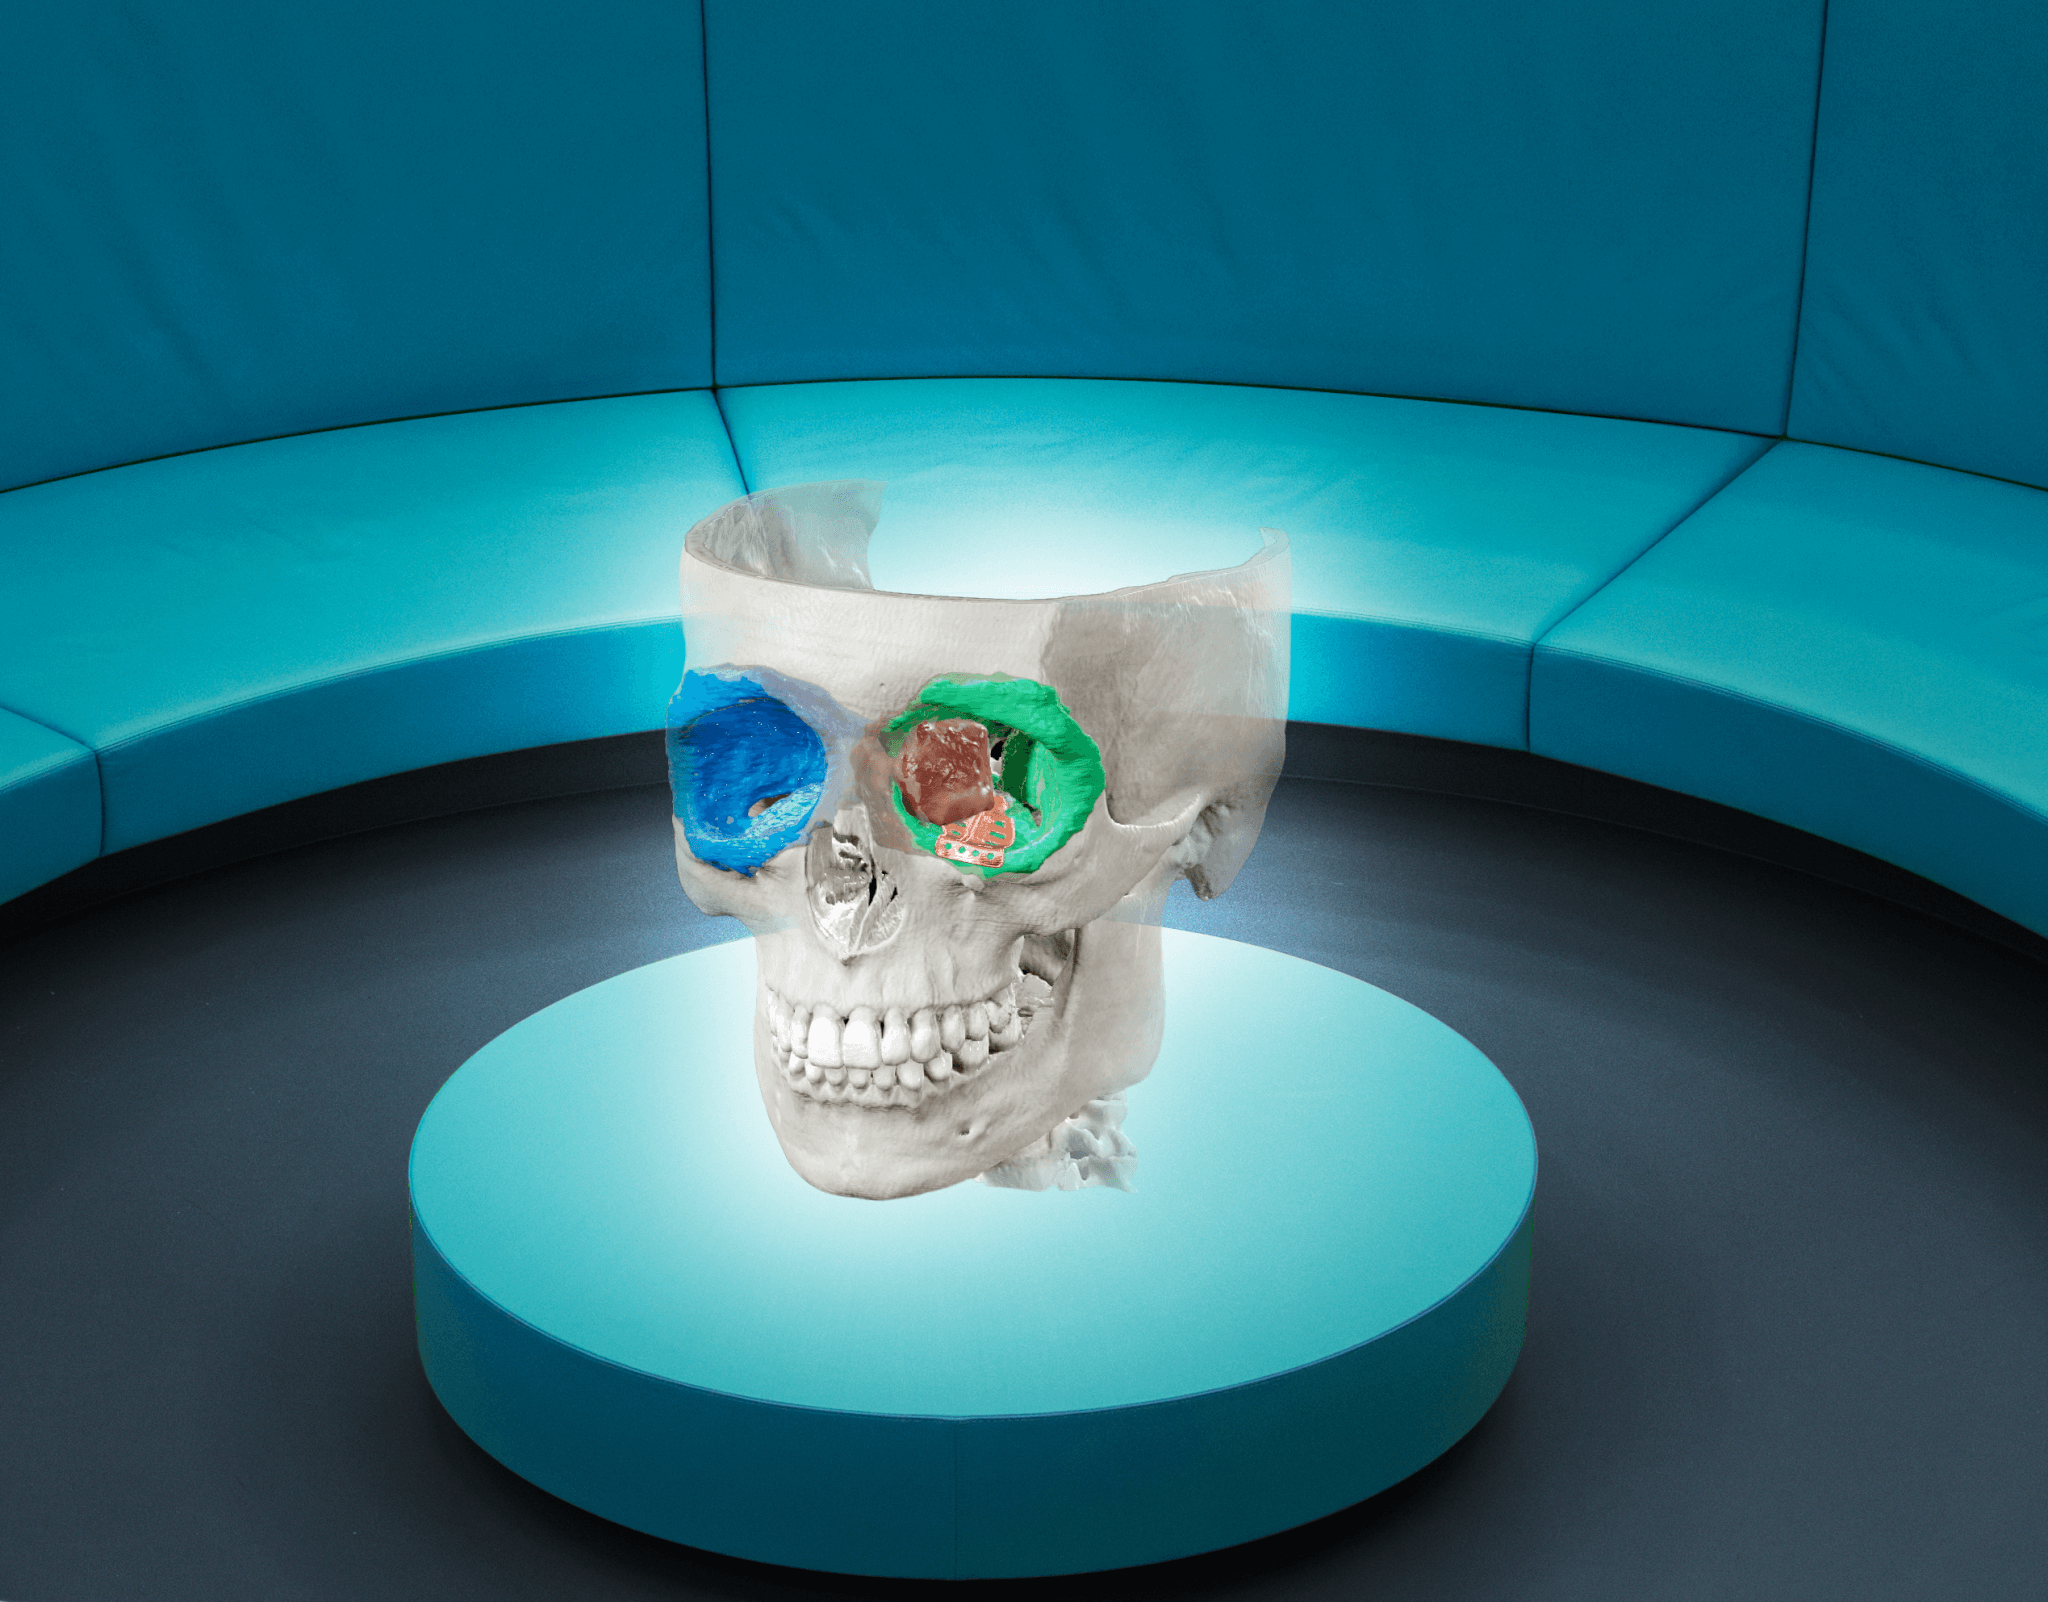 Cranial image viewed through Mixed Reality Viewer Glasses on a table in the center of the room